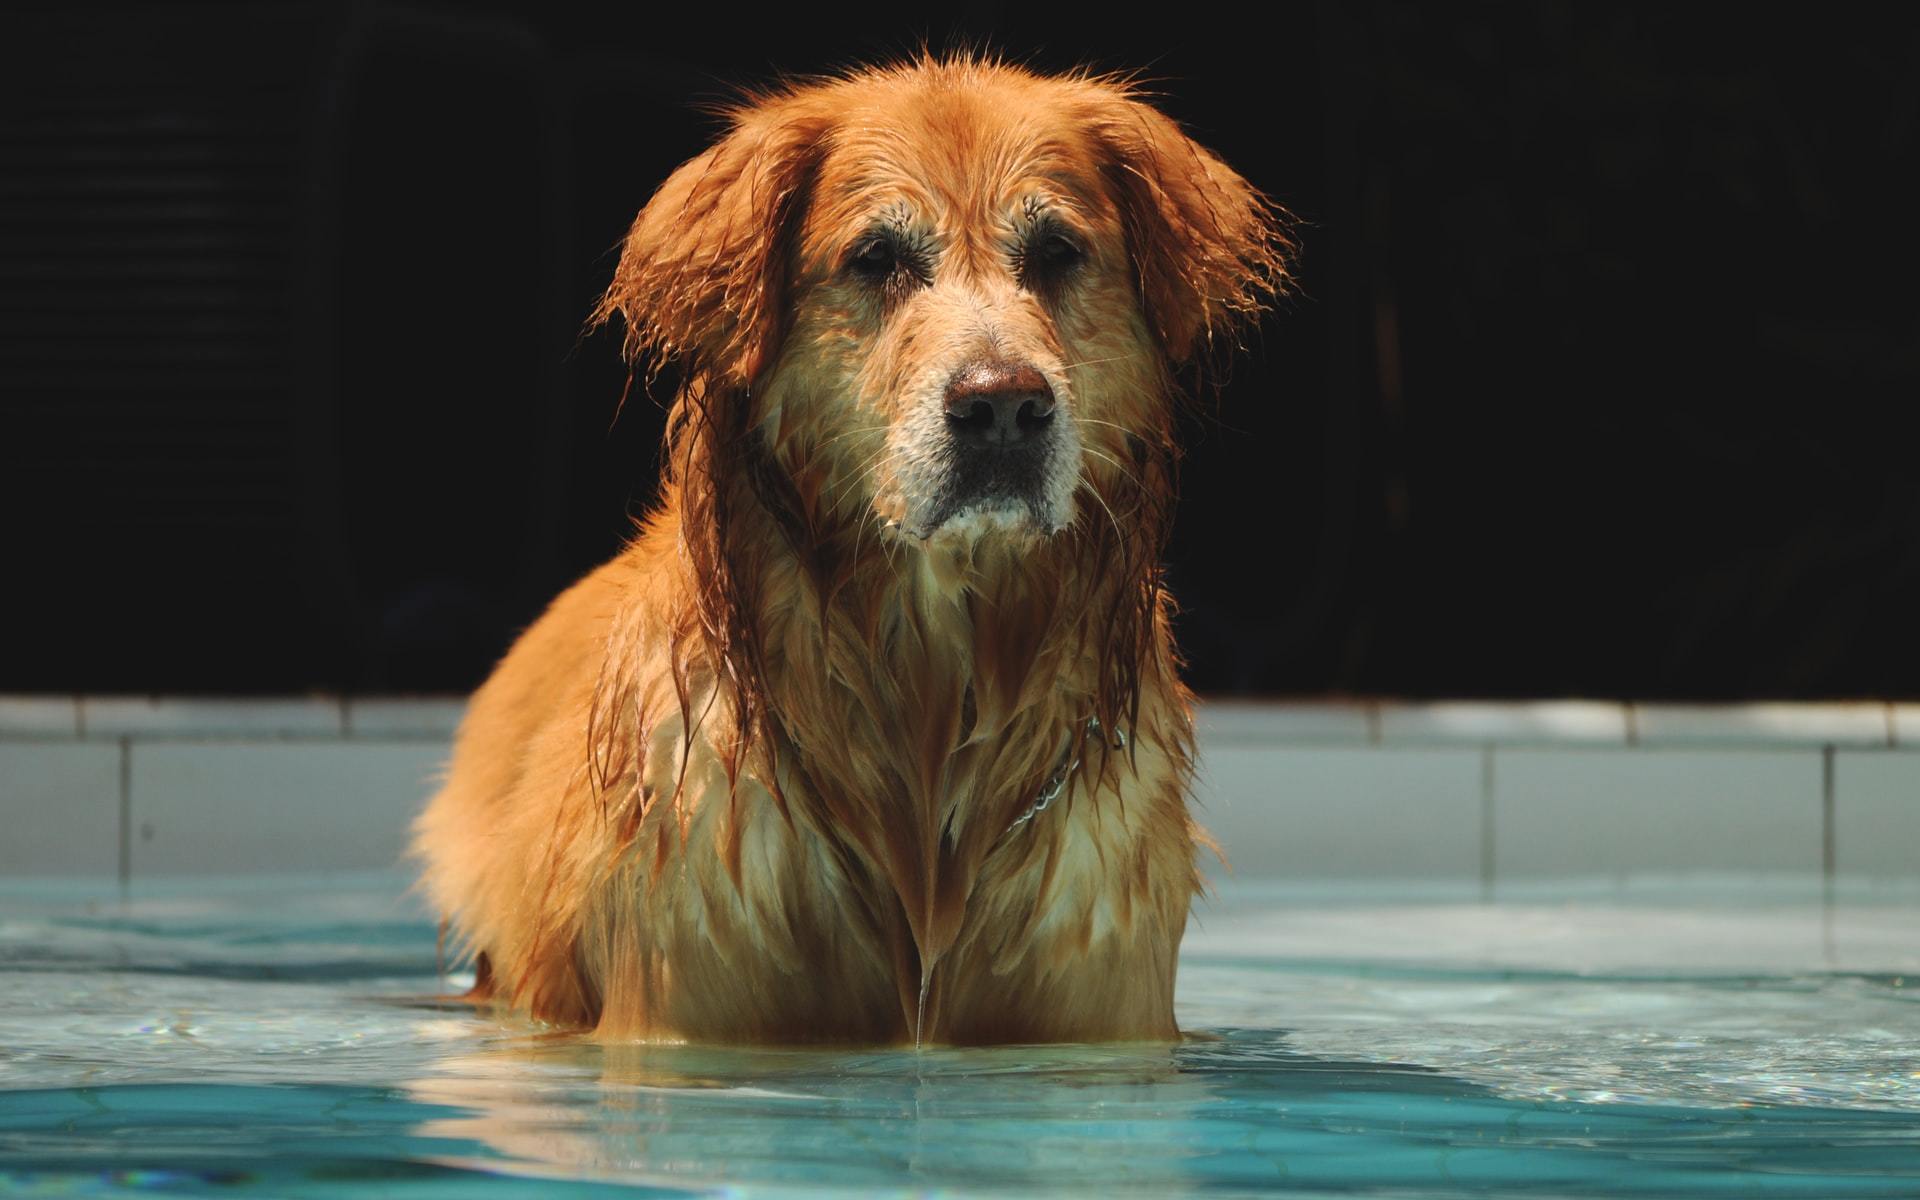 CPR for drowning pets